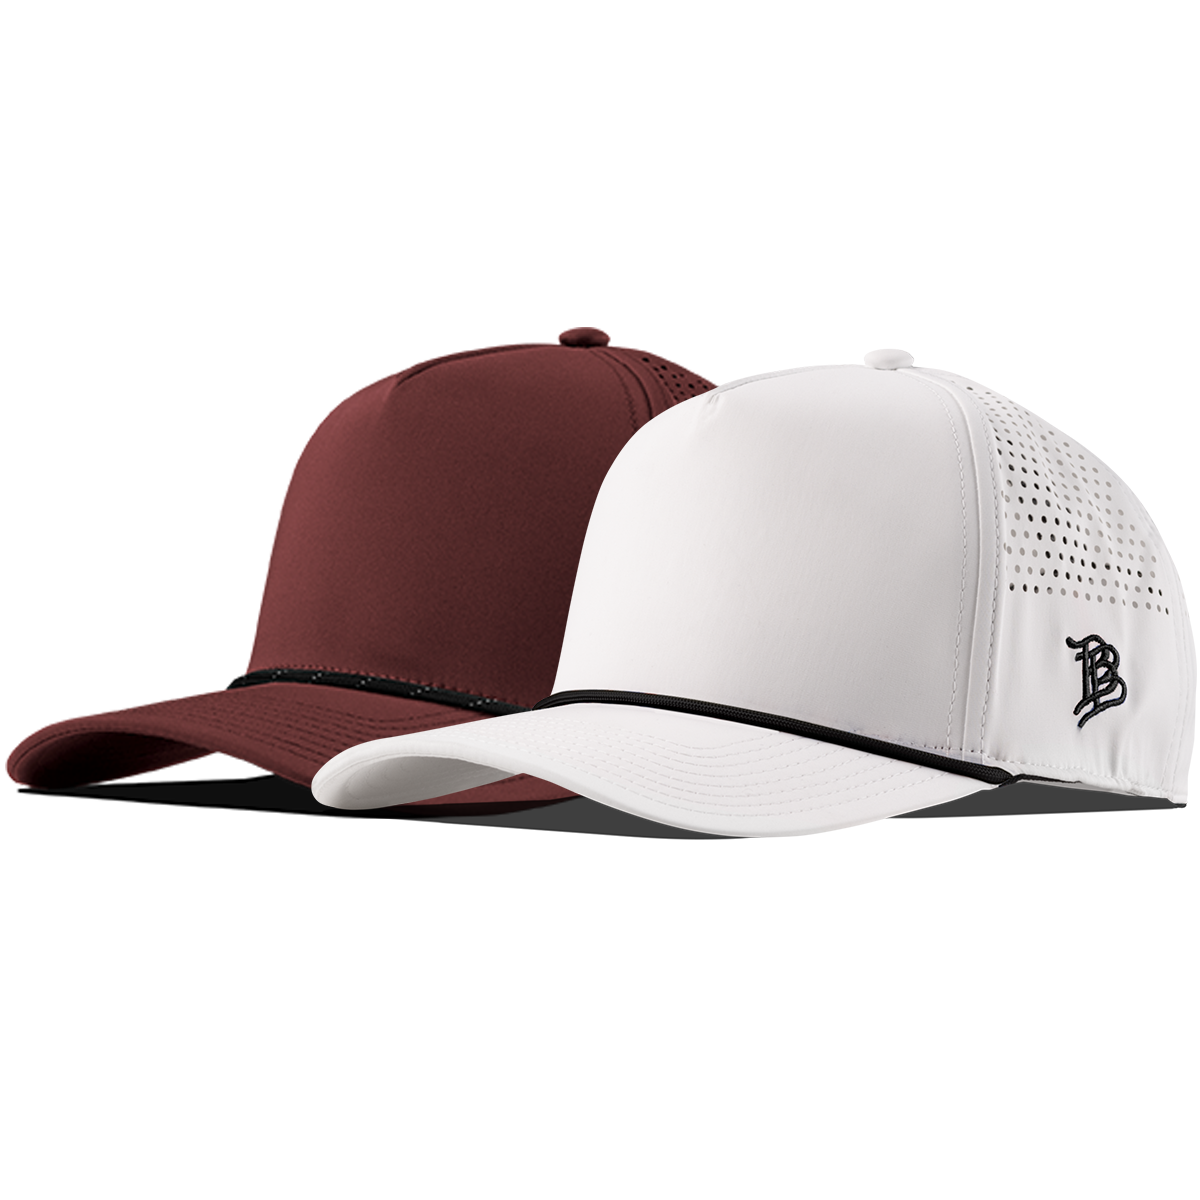 Bare Curved 5 Panel Rope 2-Pack Maroon/Black + White/Black